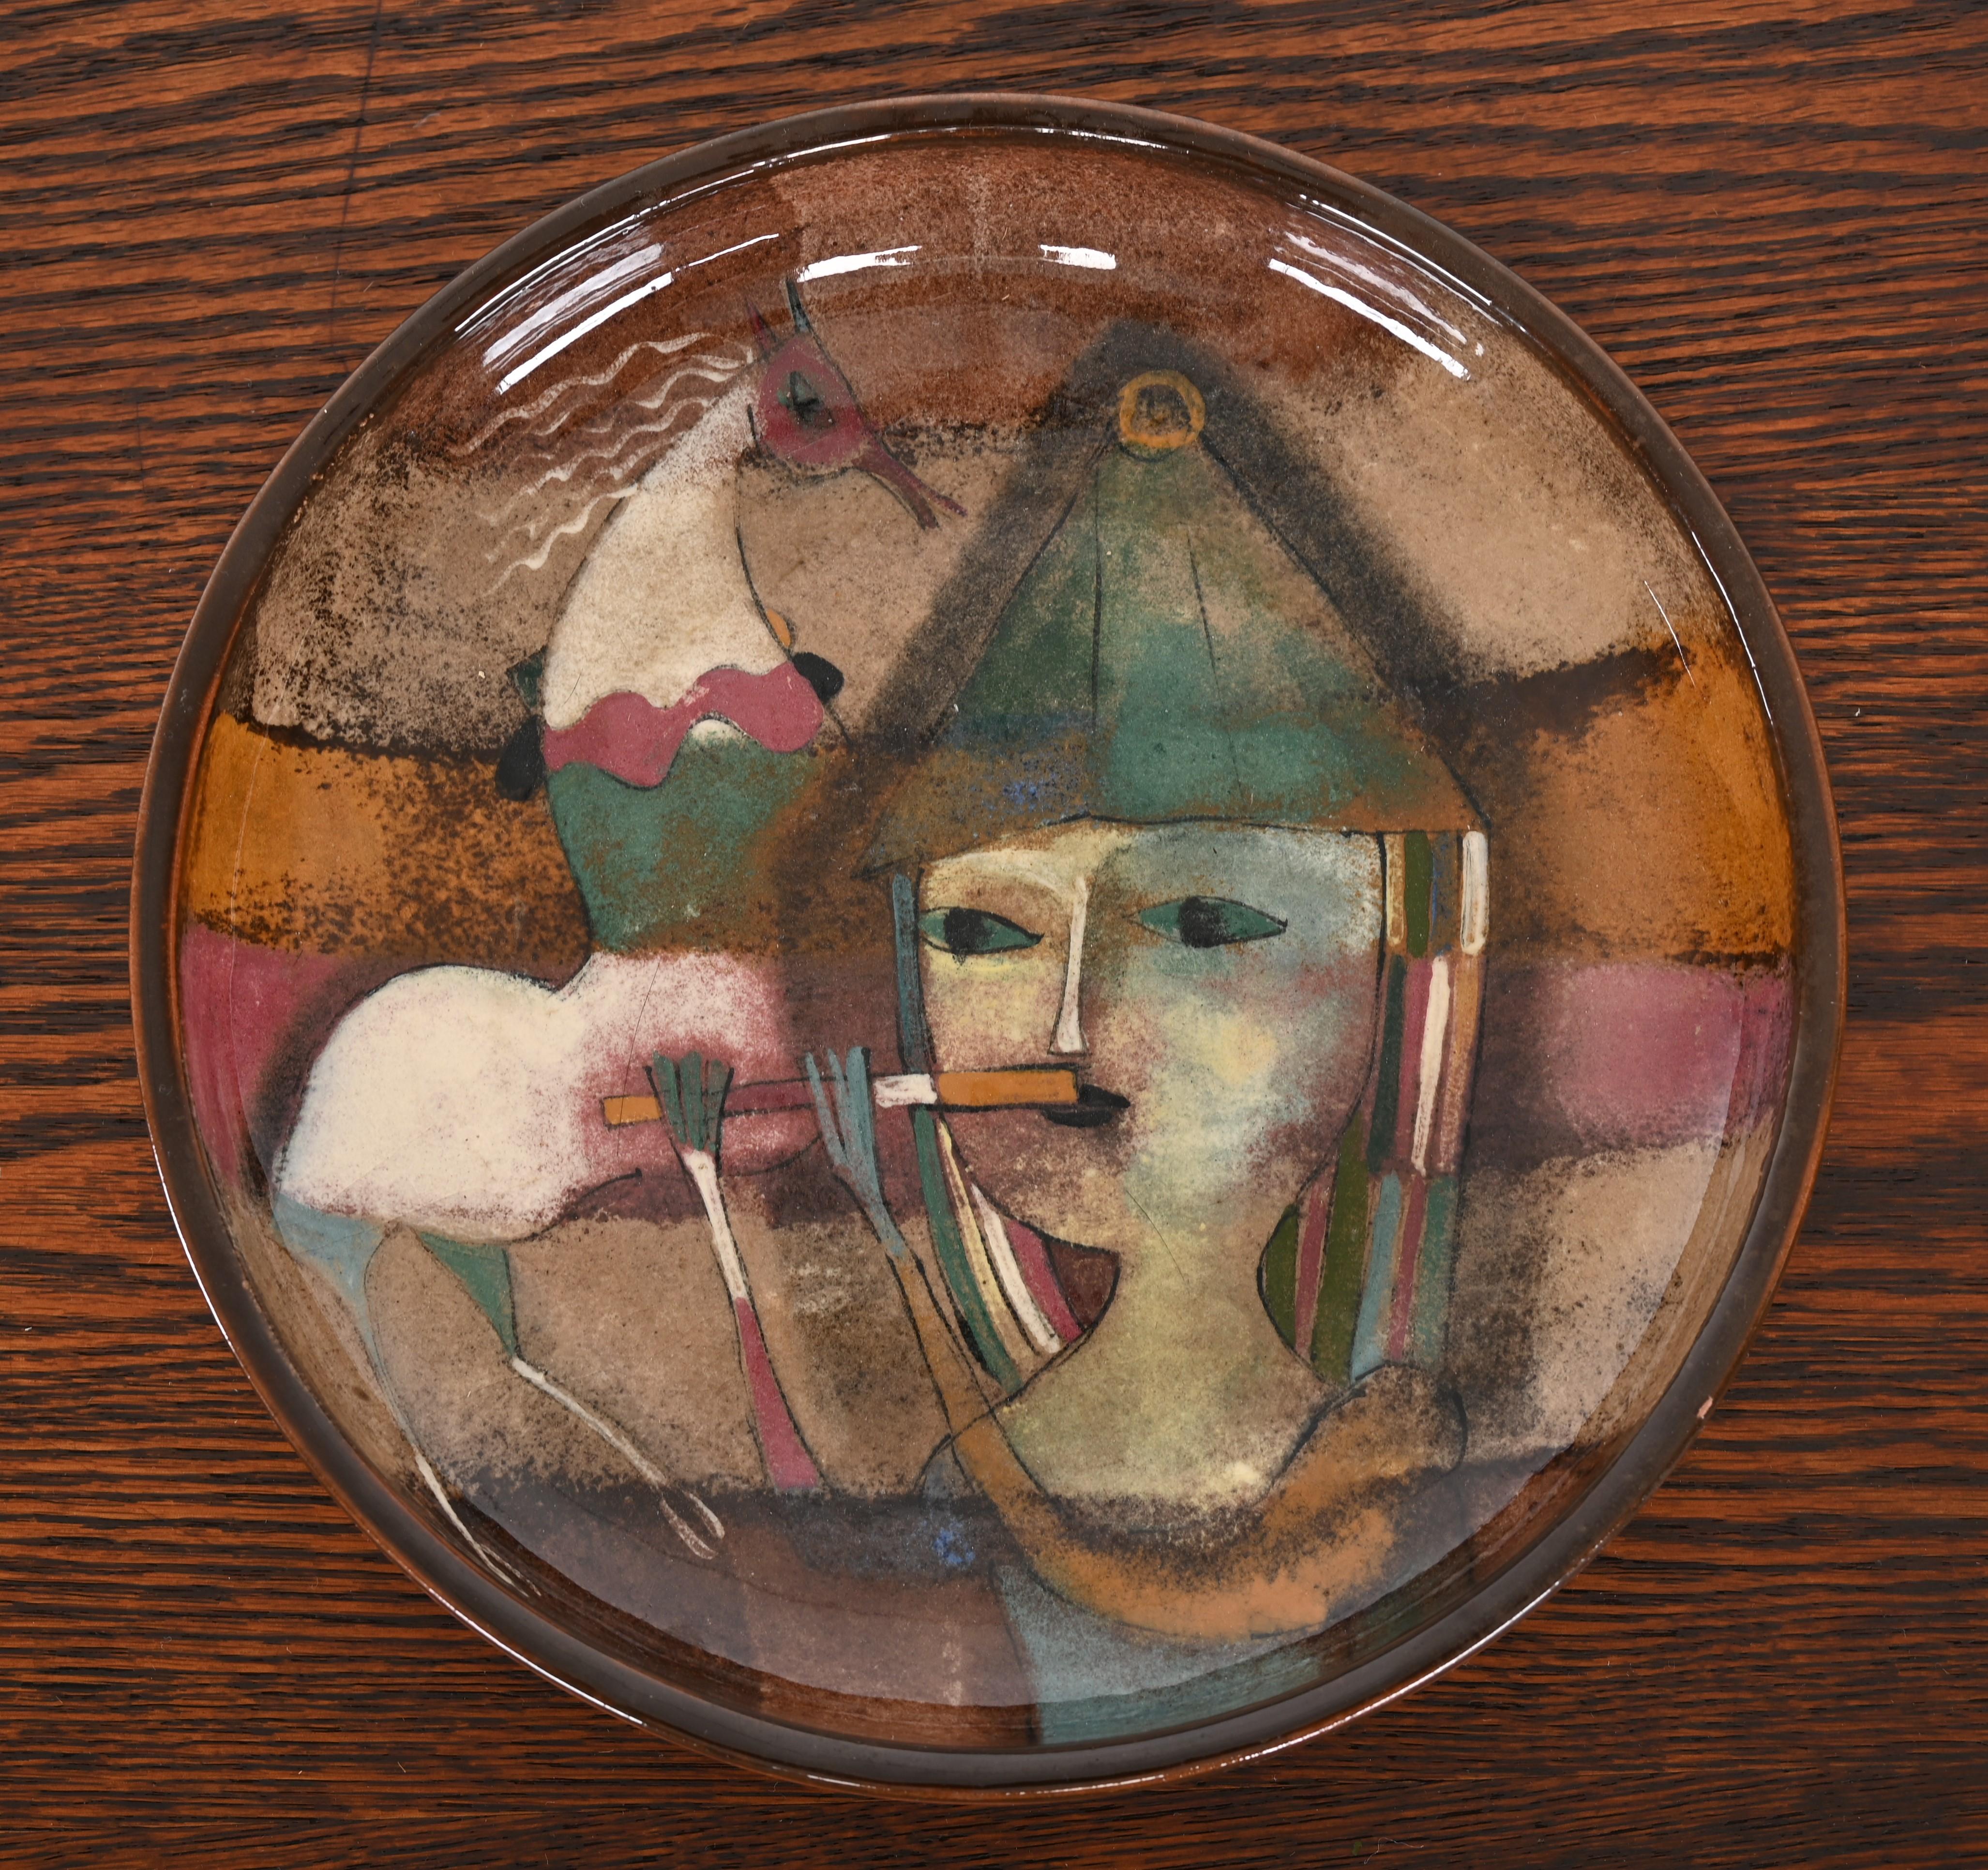 A large ceramic dish, plate or bowl decorated with a woman playing the flute with a horse in the background. Handmade by the artist Polia Pillin of Los Angeles, California. Signed 